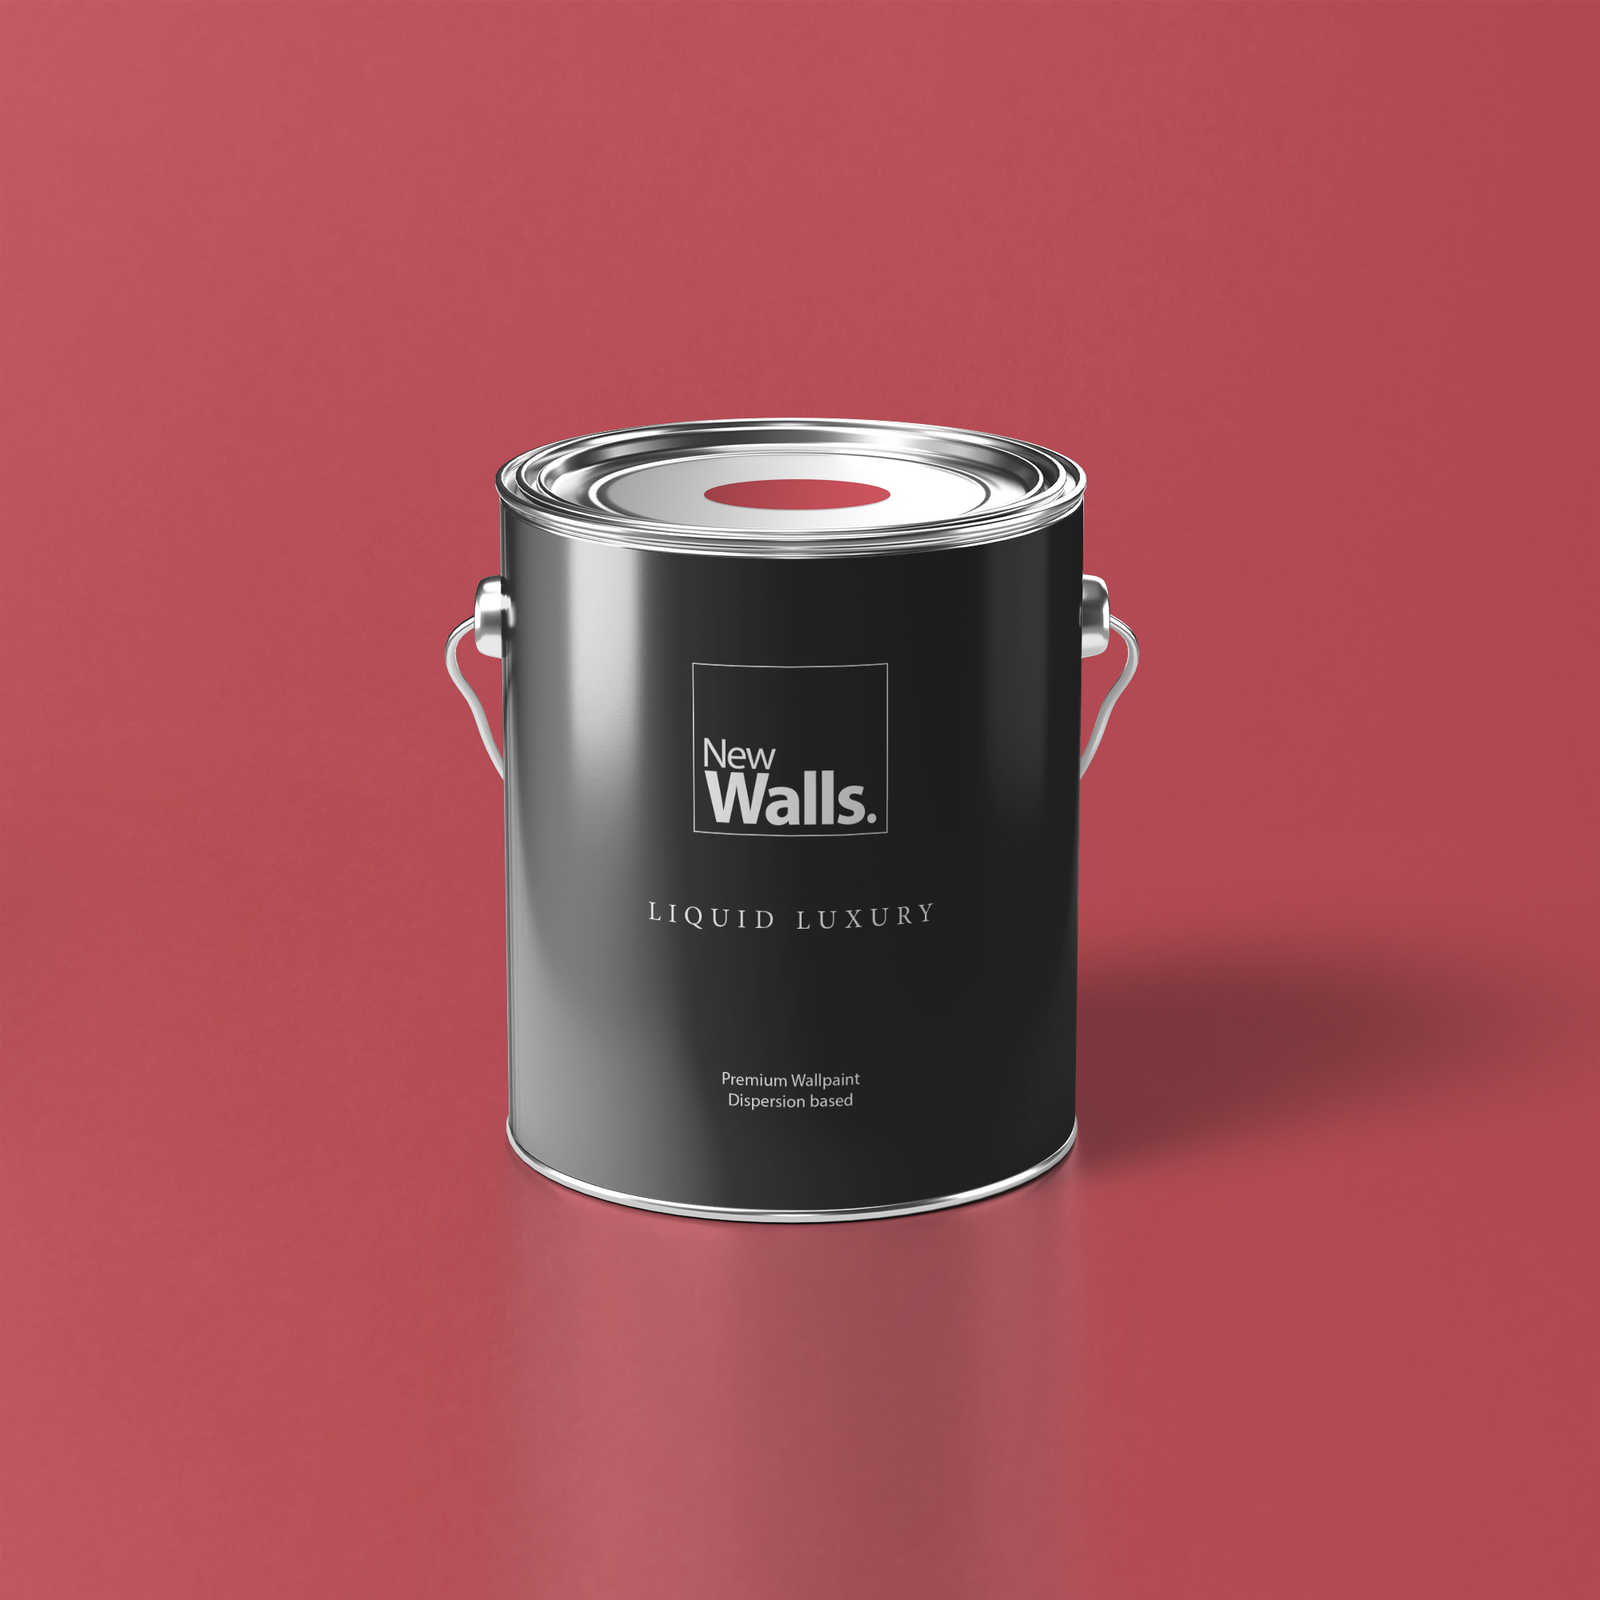 Premium Wall Paint Bold Pink »Blooming Blossom« NW1019 – 5 litre
